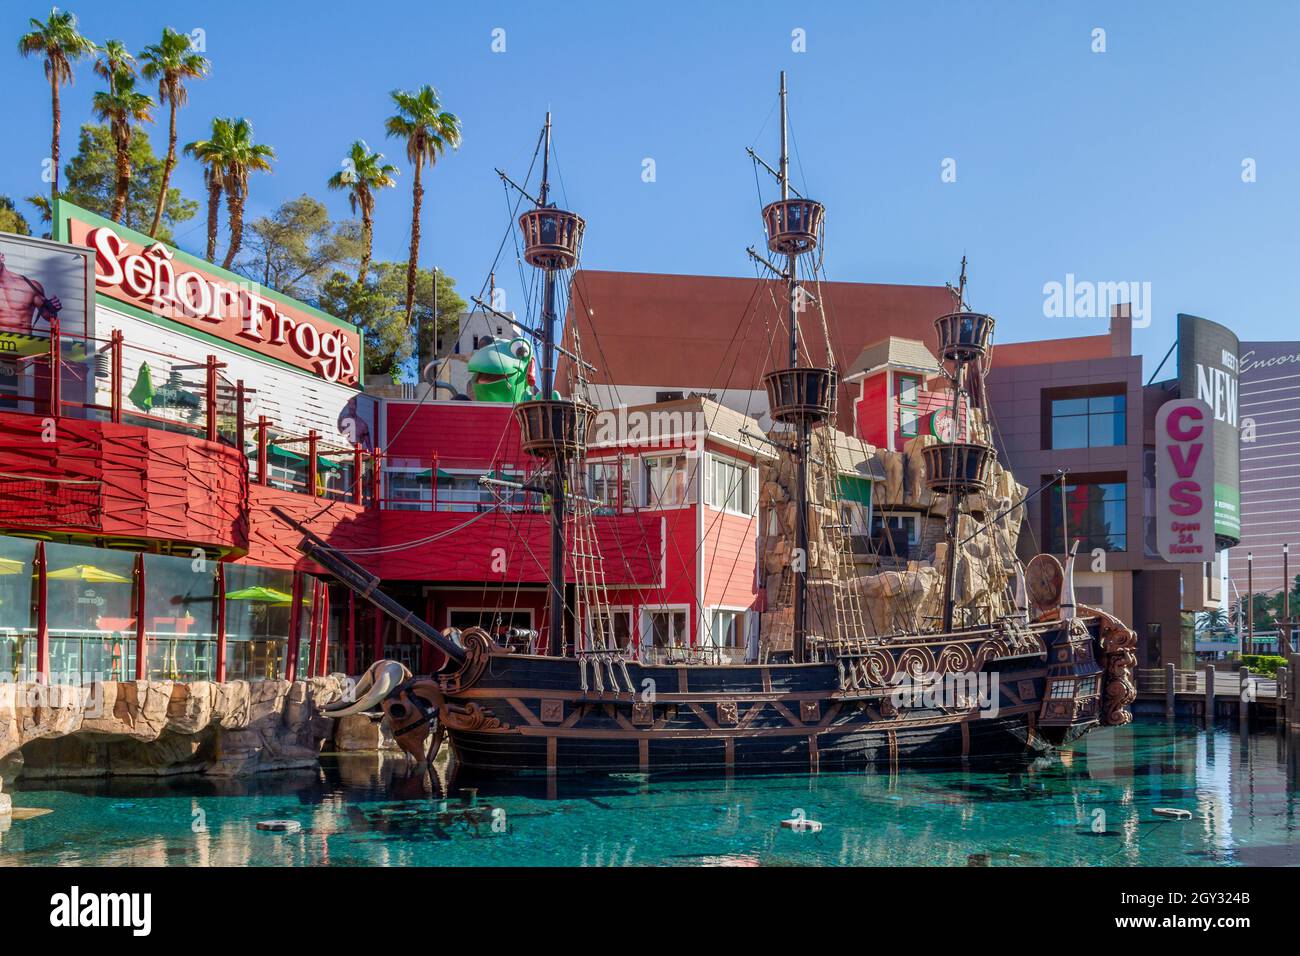 Las Vegas, NV, USA – June 8, 2021: Pirate ship in Buccaneer Bay in front of Señor, Frog’s at Treasure Island Hotel and Casino located in Las Vegas, Ne Stock Photo